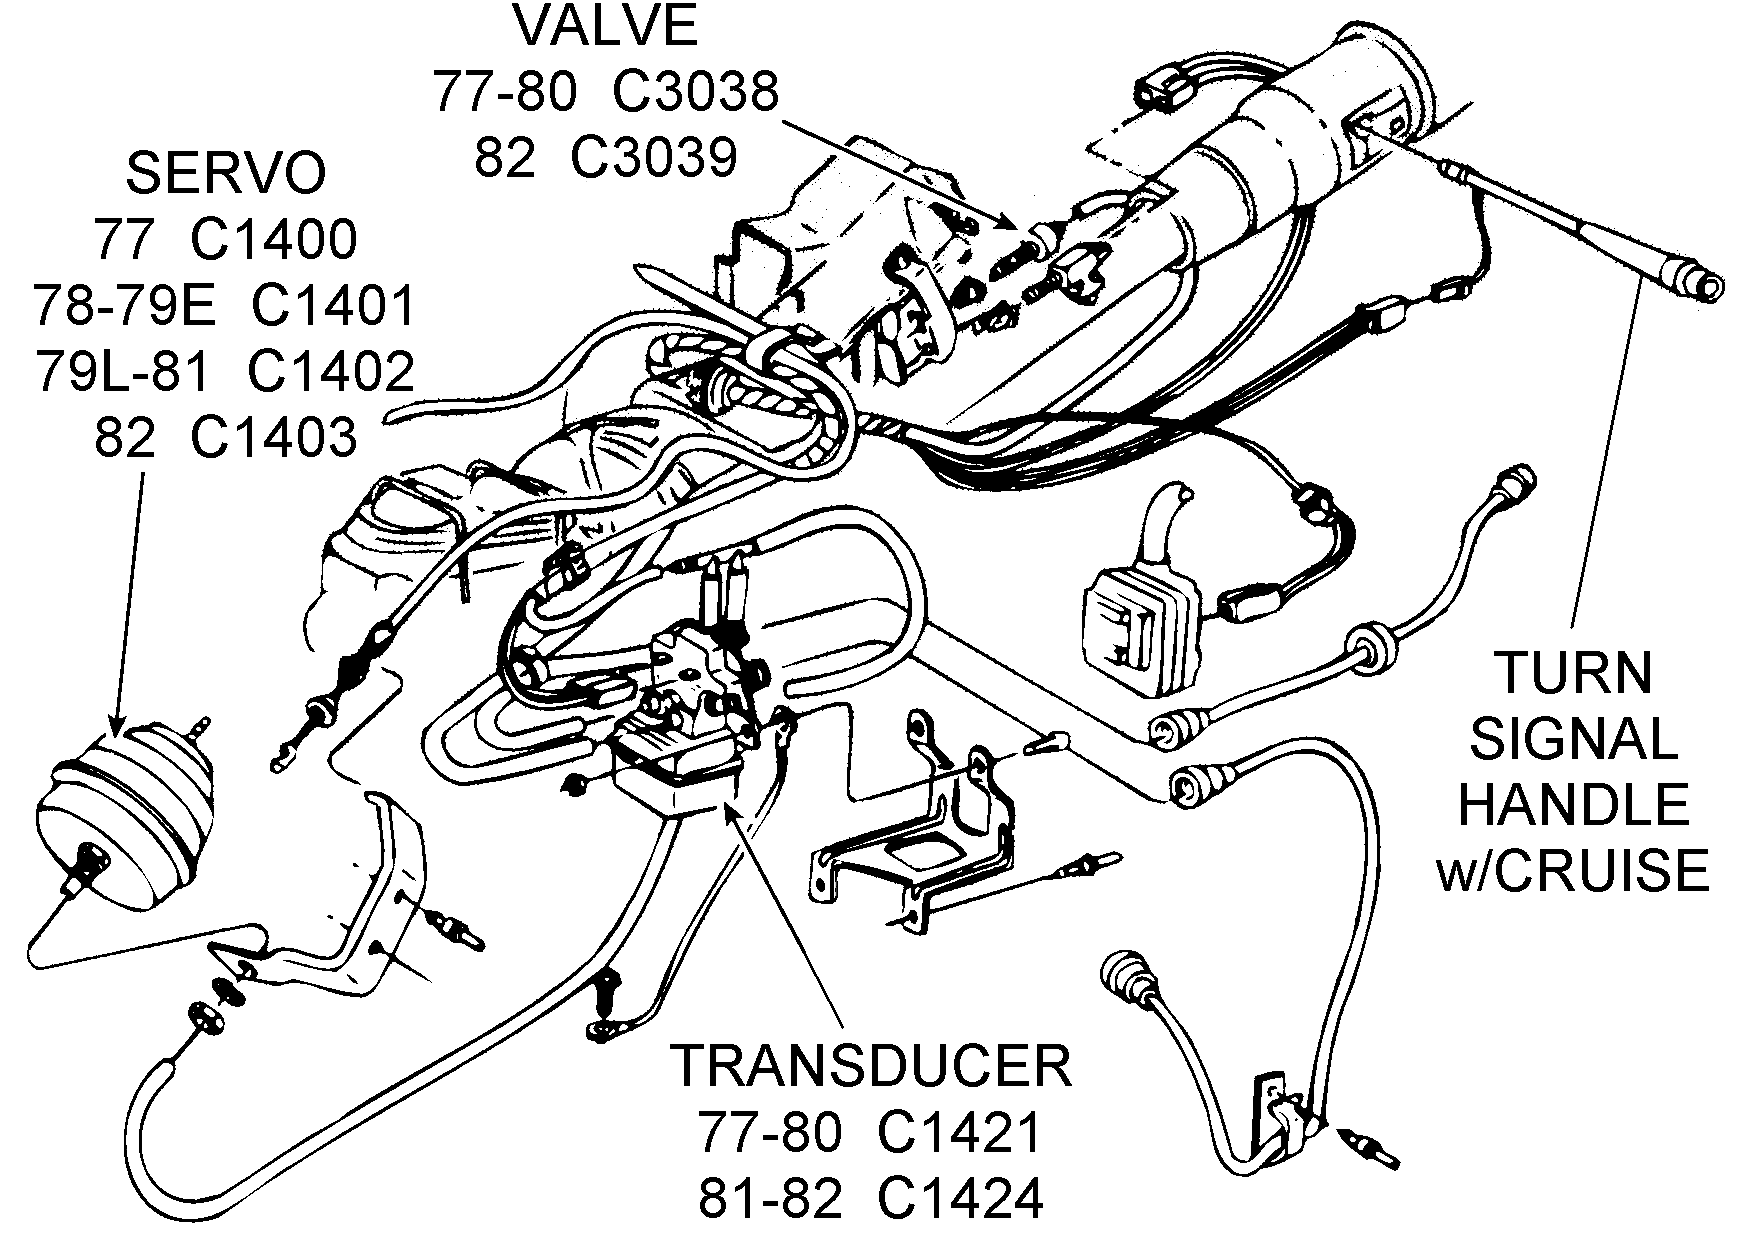 Cruise control Vac Drawing for 1982 with Resume ... 1999 f350 68 engine fuse panel diagram 